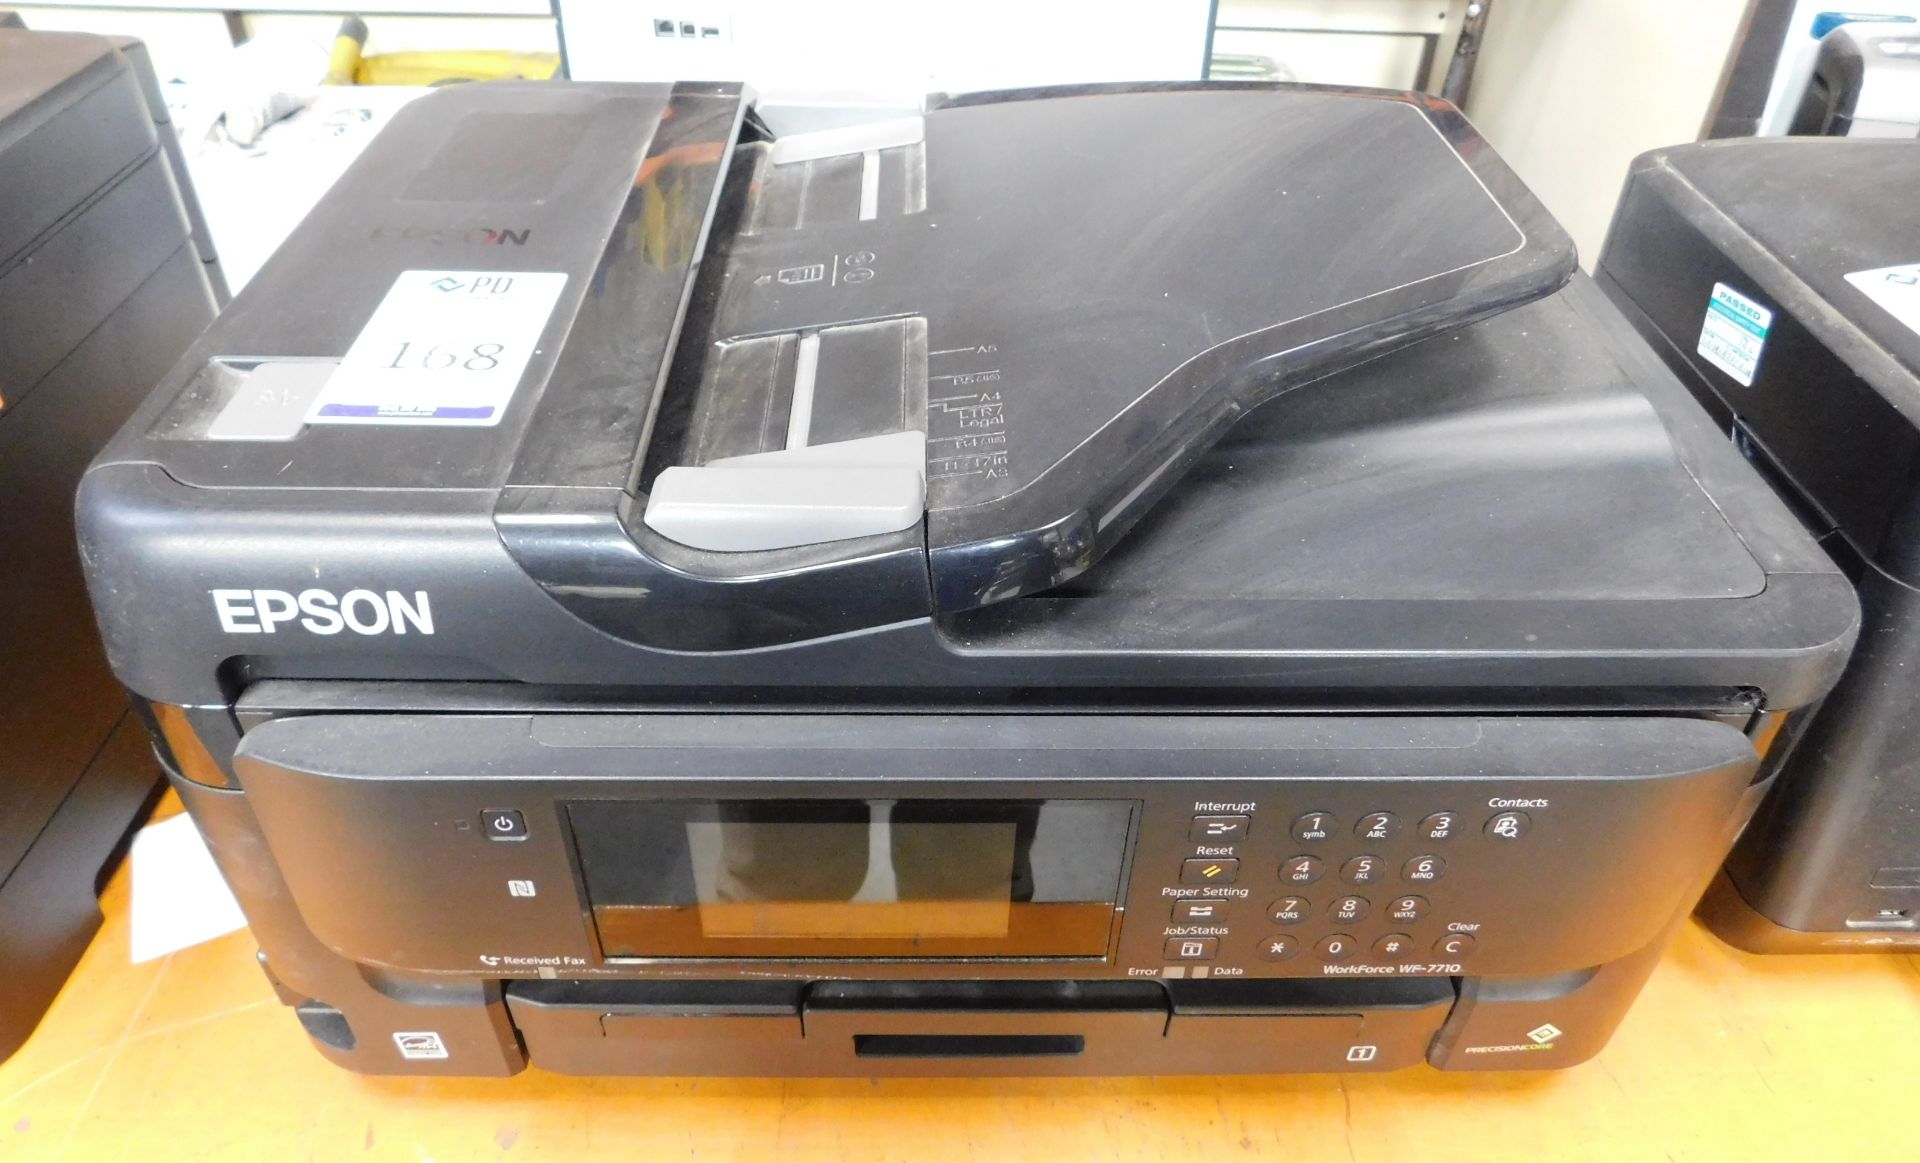 Epson WorkForce WF-7710 C443A Printer, Serial Number X45R014406 (Location: Brentwood. Please Refer